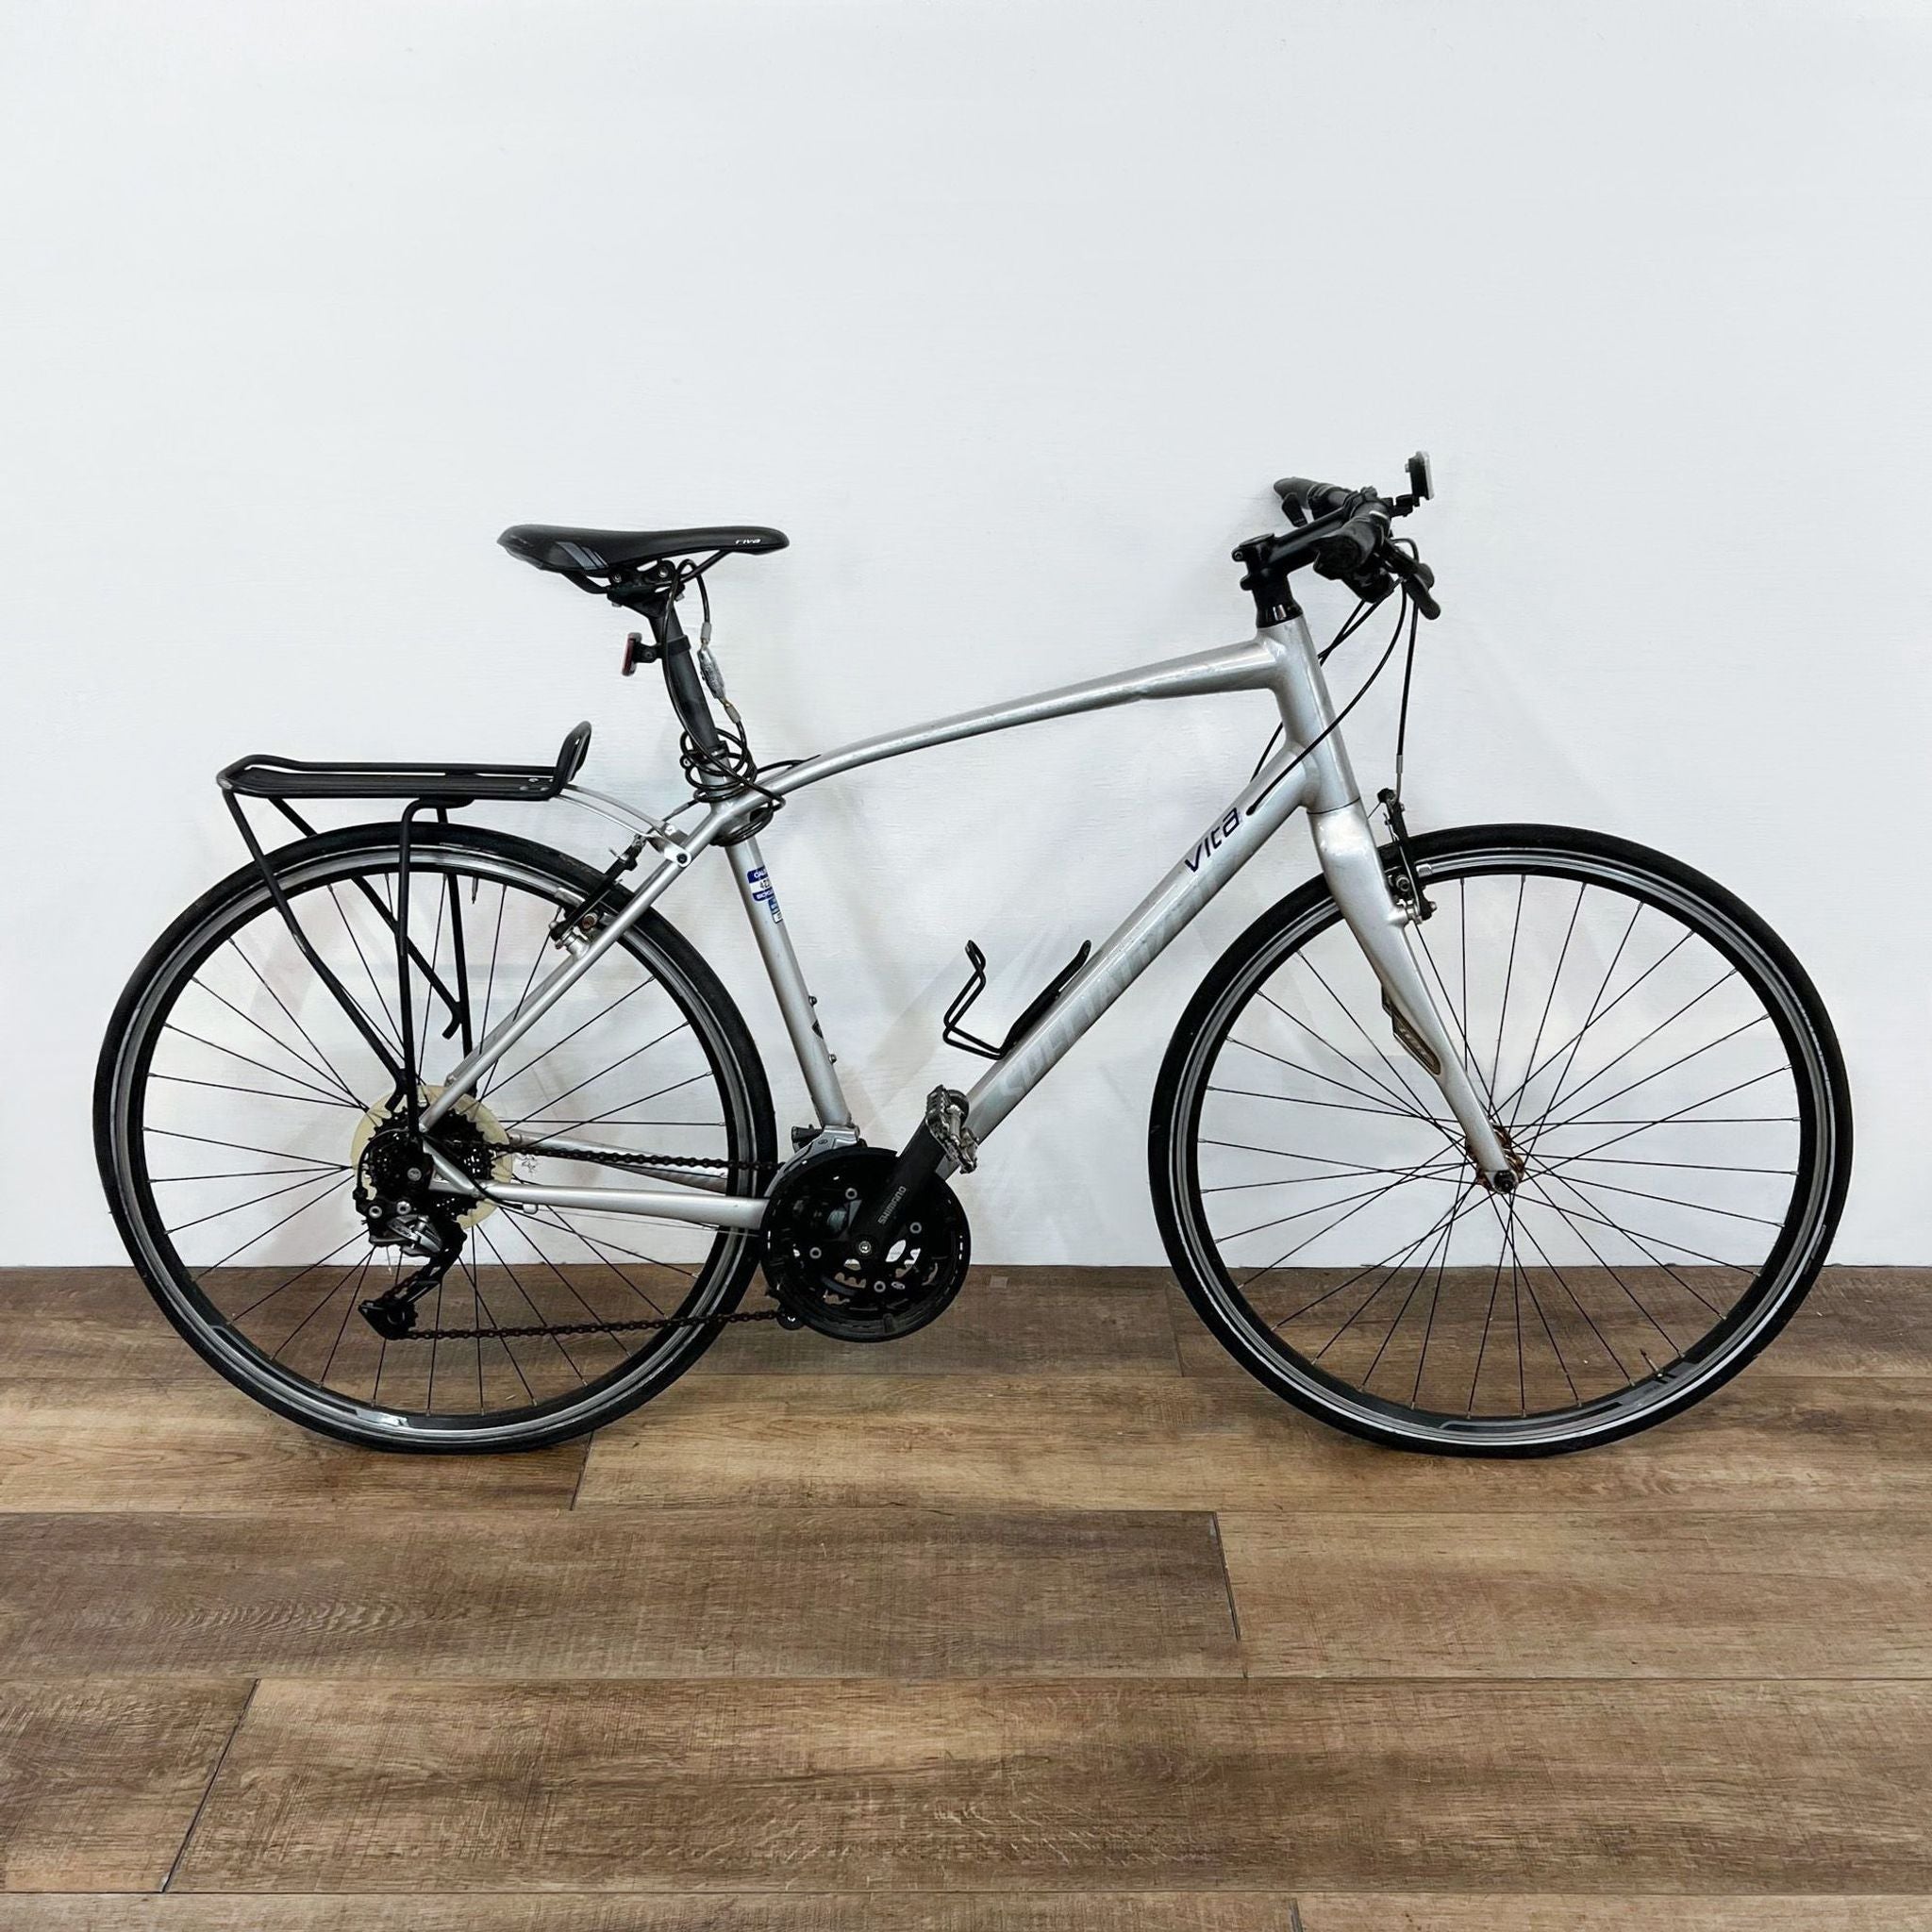 Lightweight Specialized bicycle for city commuting, featuring robust aluminum construction and modern design.